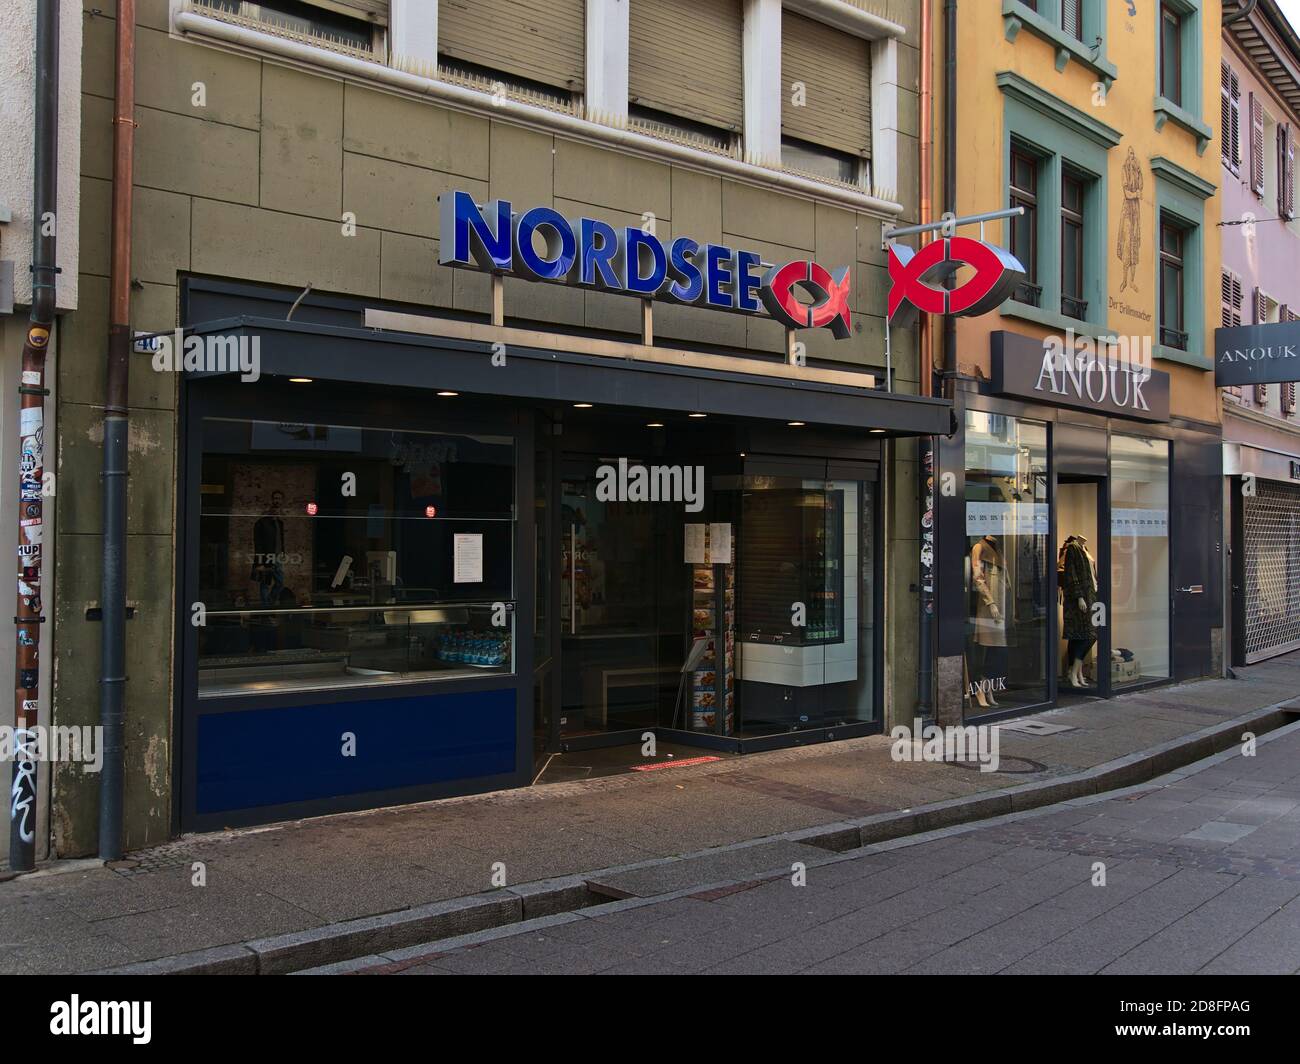 Freiburg, Baden-Wuerttemberg, Germany - 10/25/2020: Front view of a branch of fast food chain Nordsee (North Sea, specialized on seafood). Stock Photo